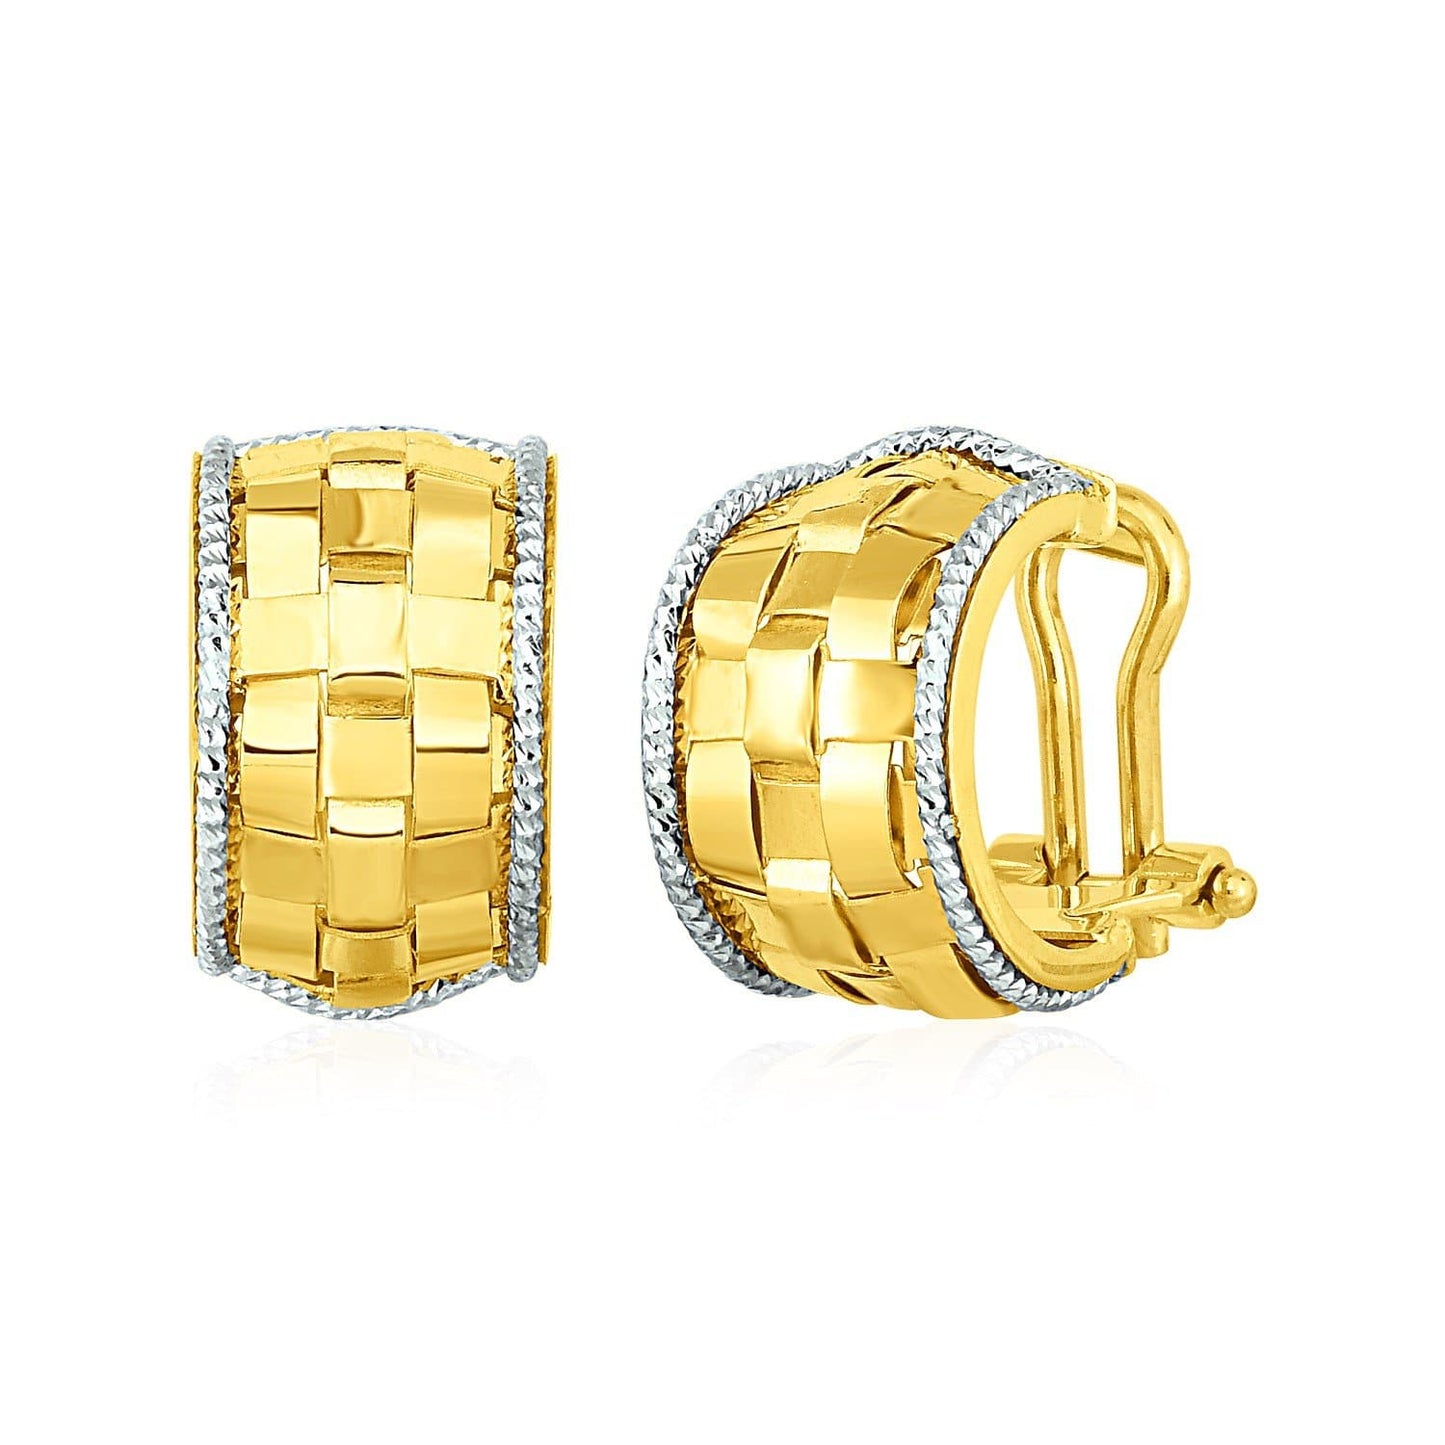 Wide Hoop Earrings with Basket Weave Texture in 14k Yellow and White Gold